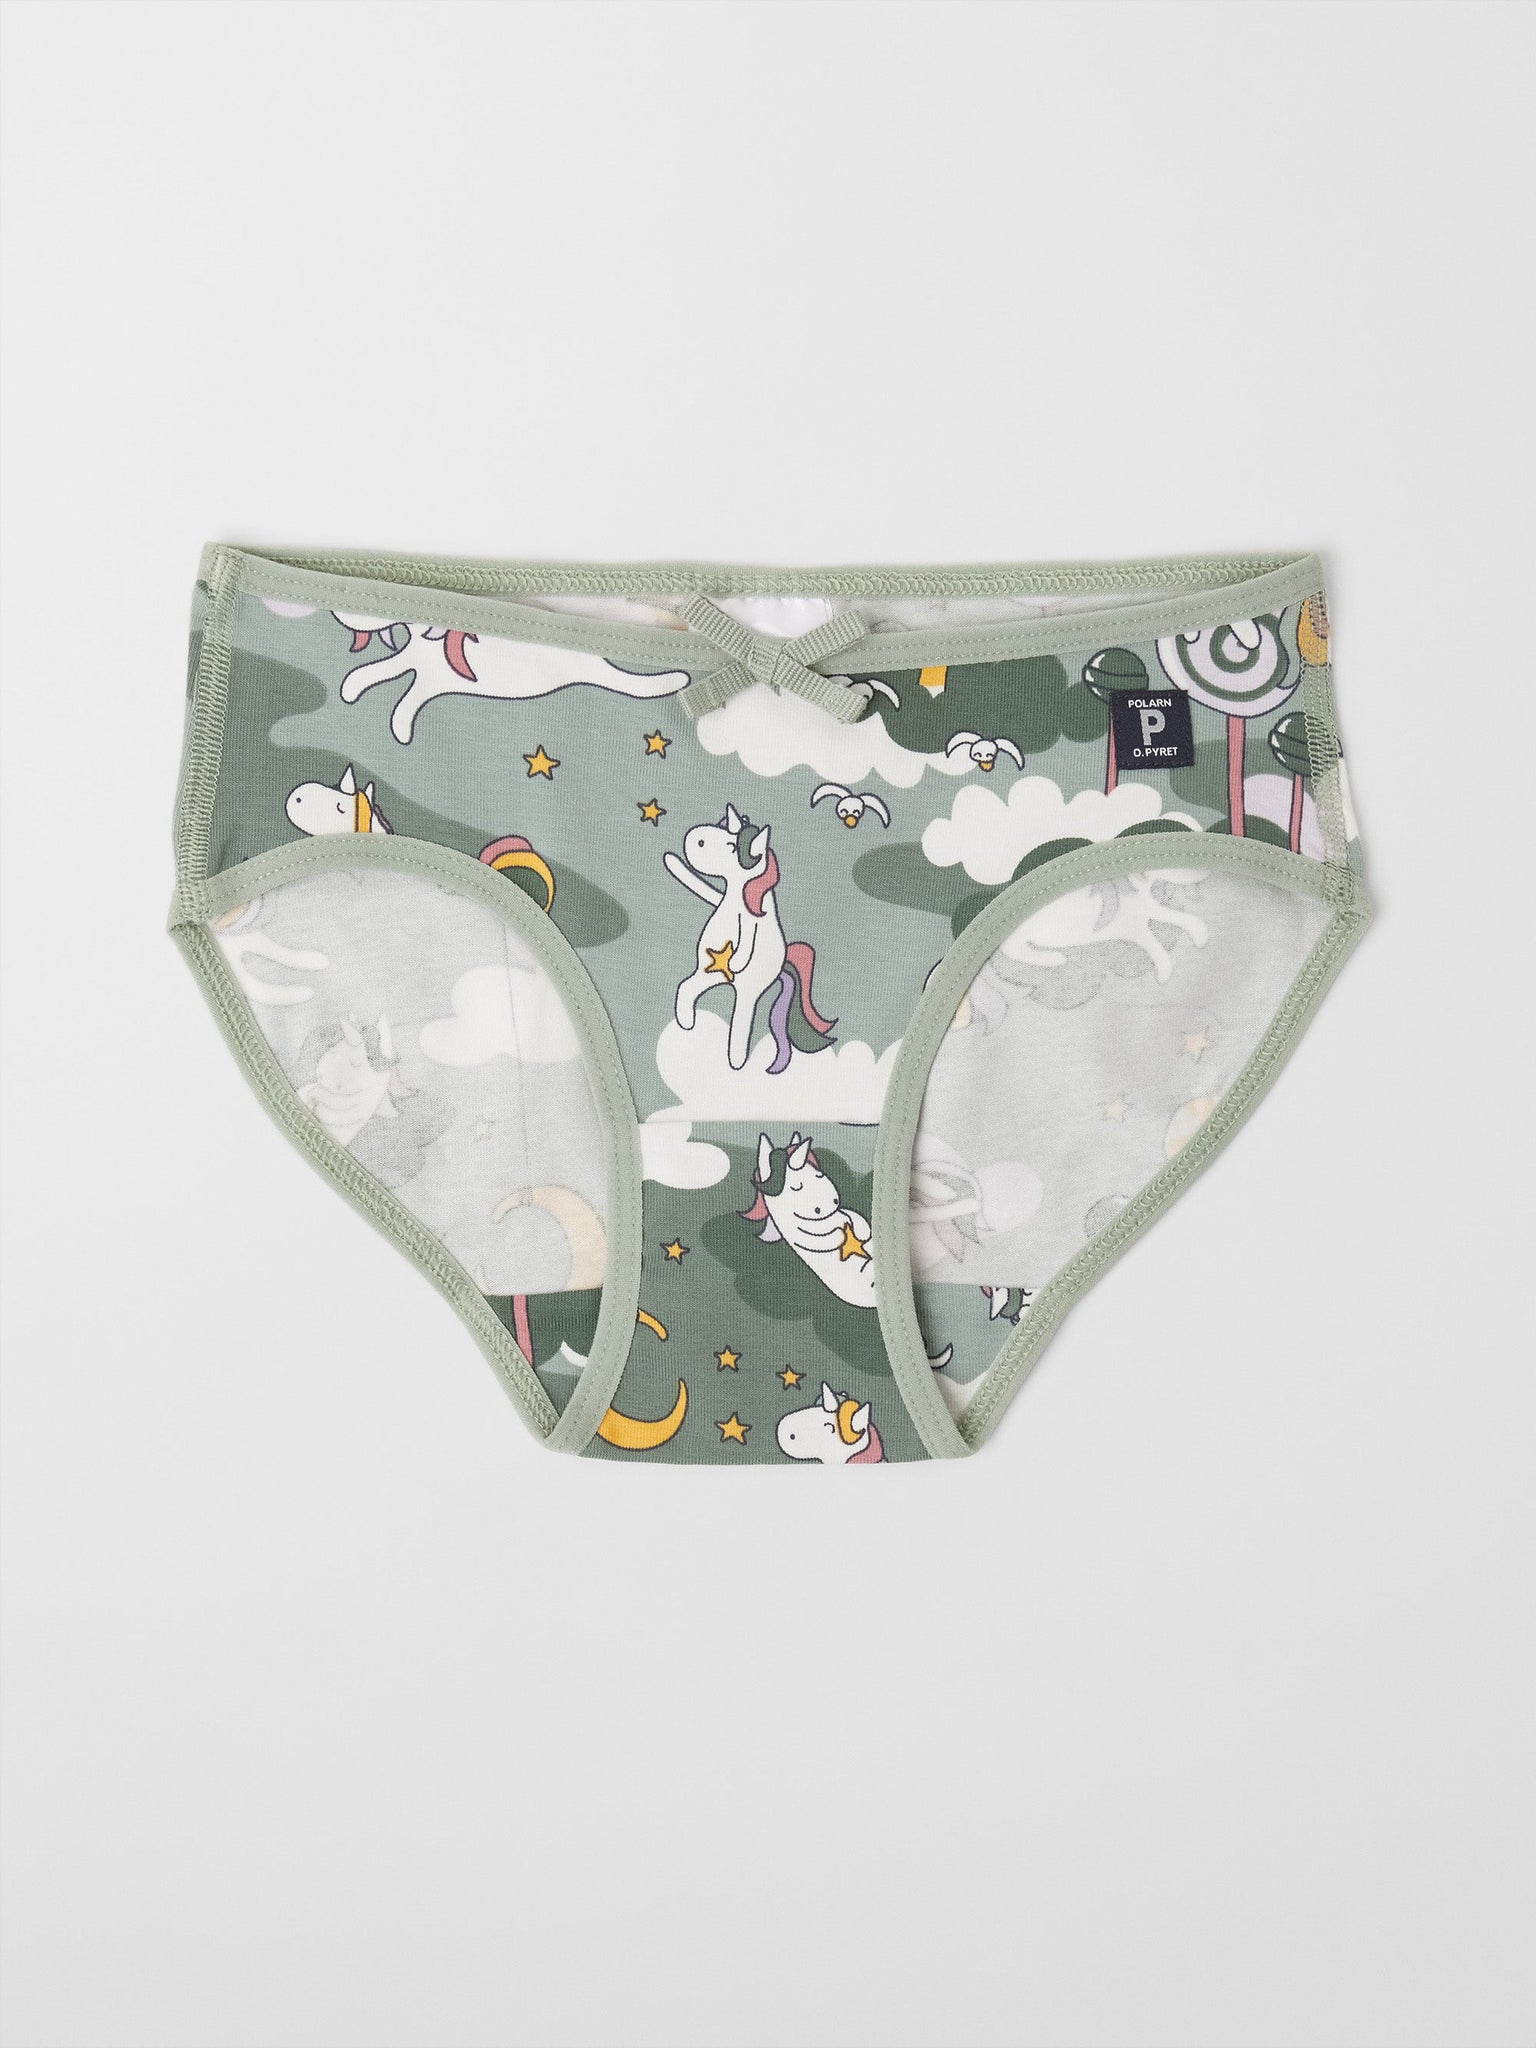 Organic Cotton Girls Briefs from the Polarn O. Pyret kidswear collection. Nordic kids clothes made from sustainable sources.